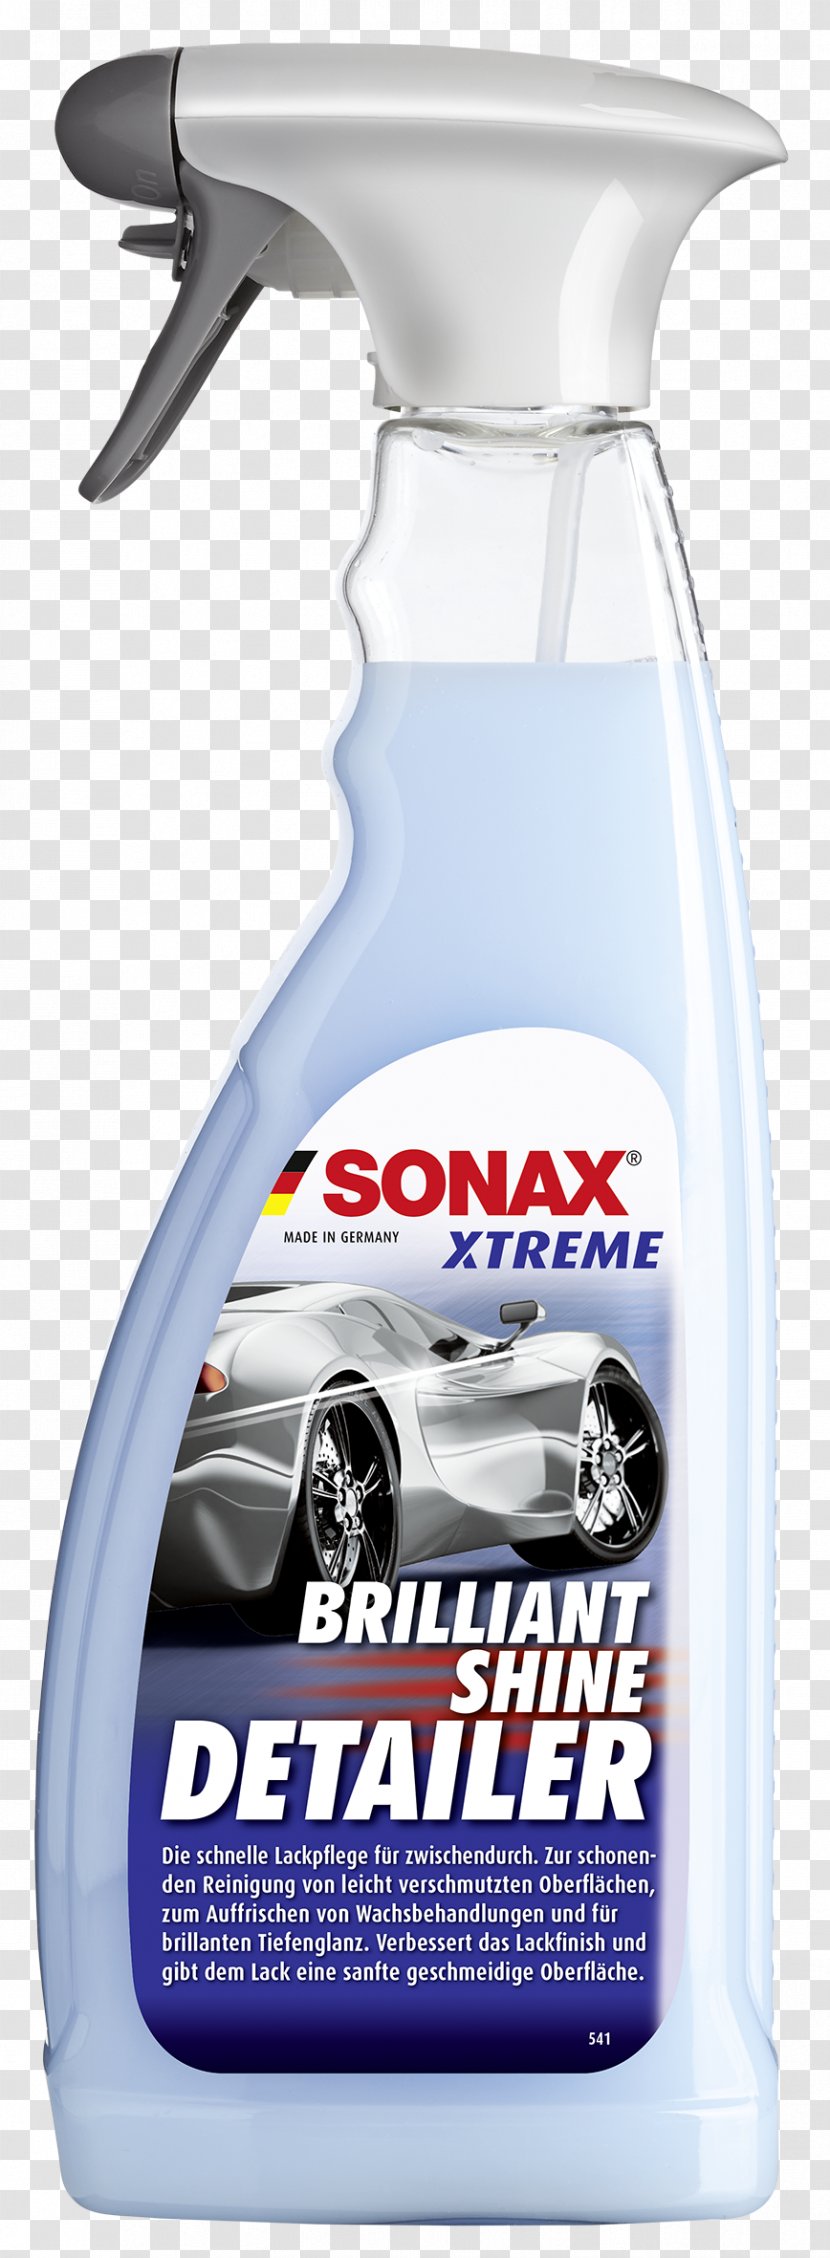 Car Sonax Wax Cleaning Amazon.com Transparent PNG